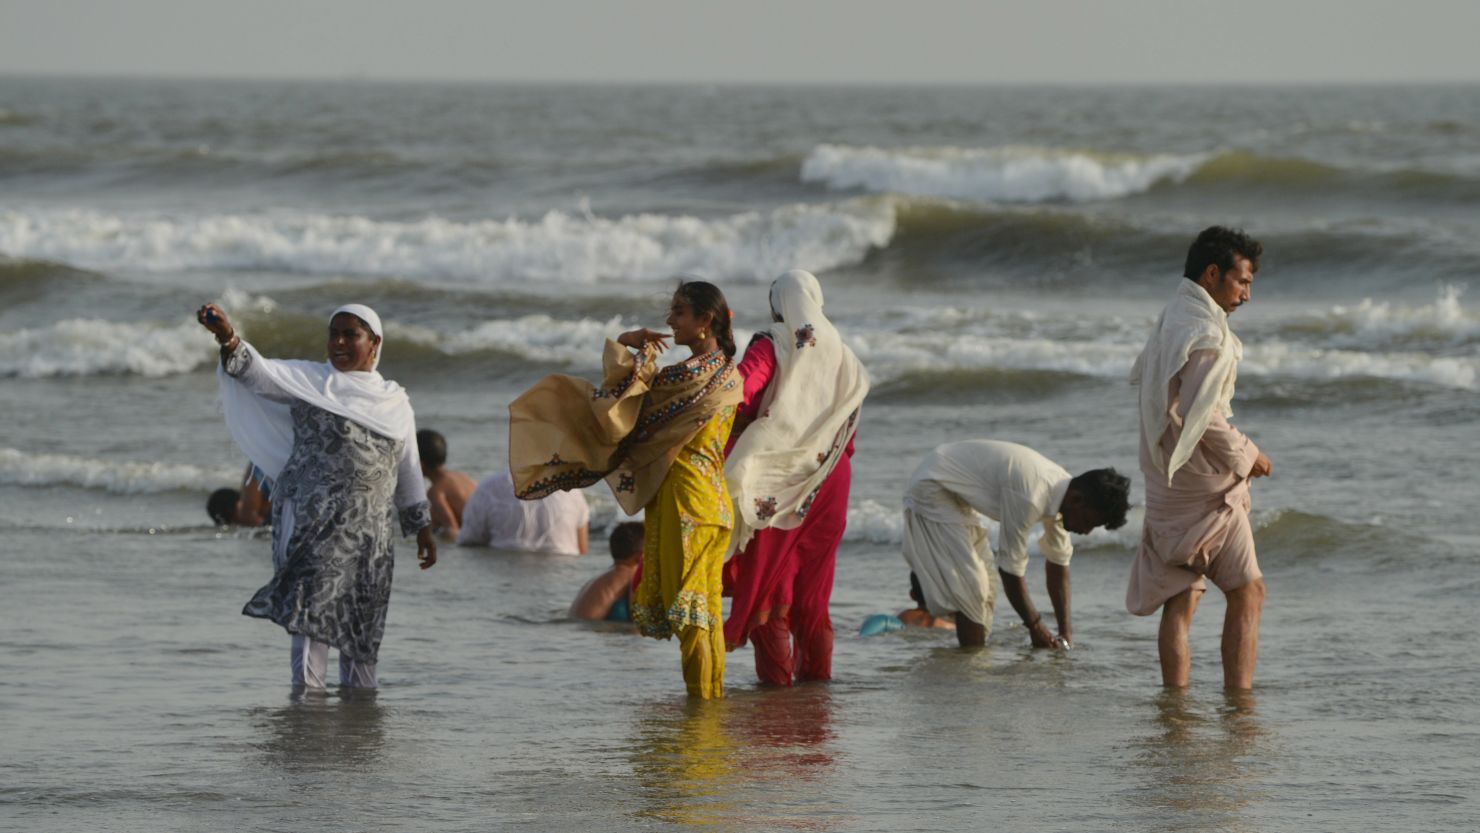 Pakistani residents cool off at Clifton beach during a heat wave in Karachi on May 21, 2018.